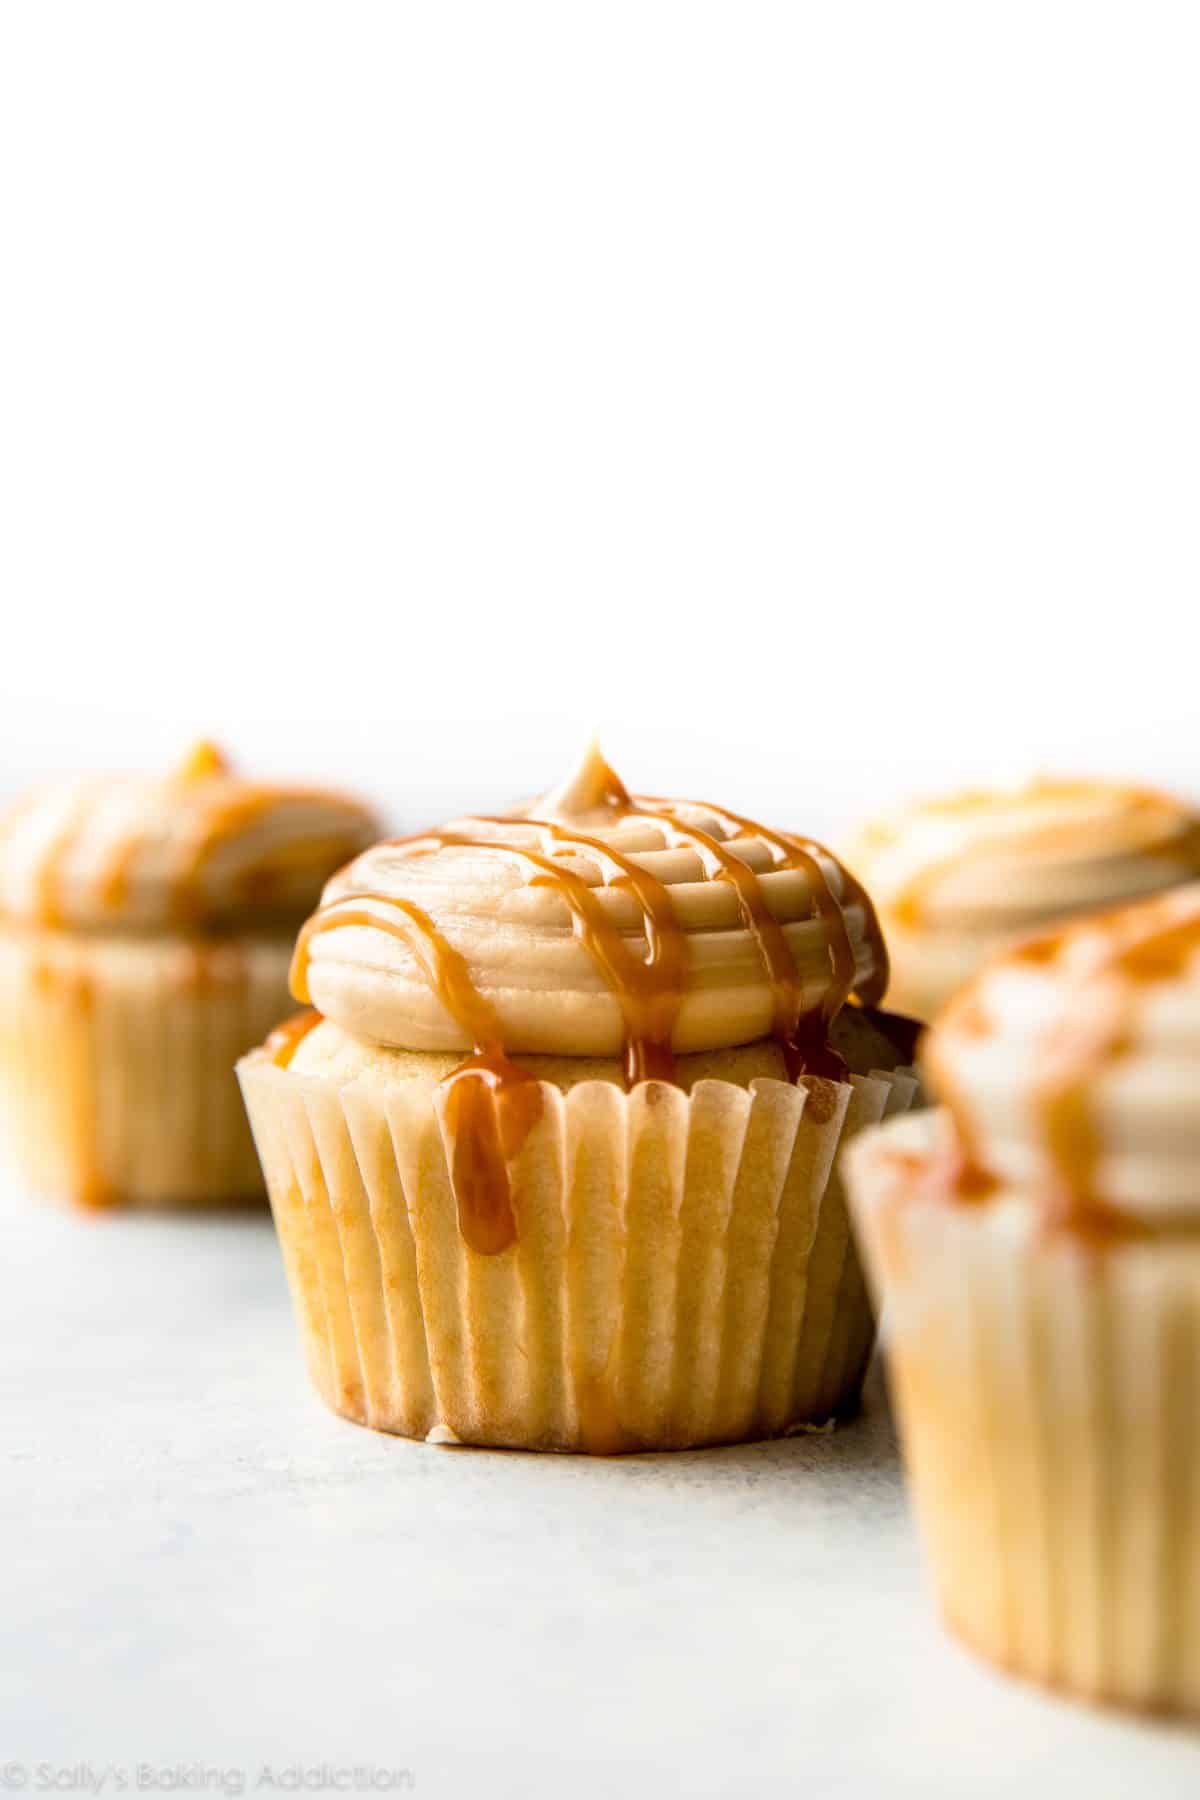 cupcakes topped with salted caramel frosting and a drizzle of salted caramel